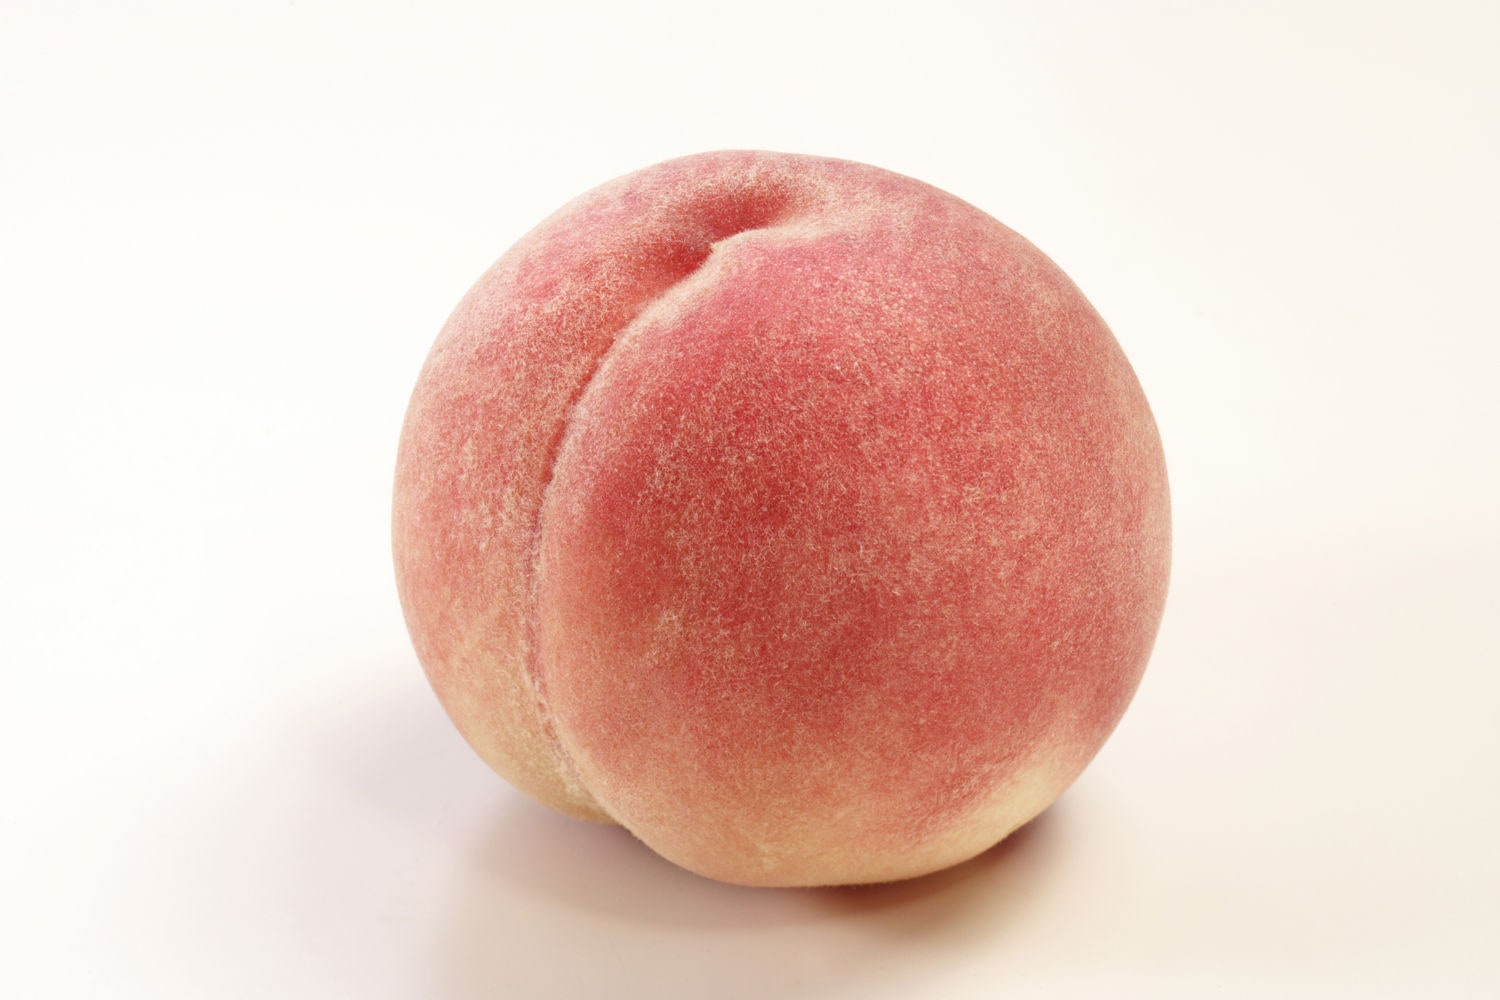 thigns women want men to know - sexy peach fruit